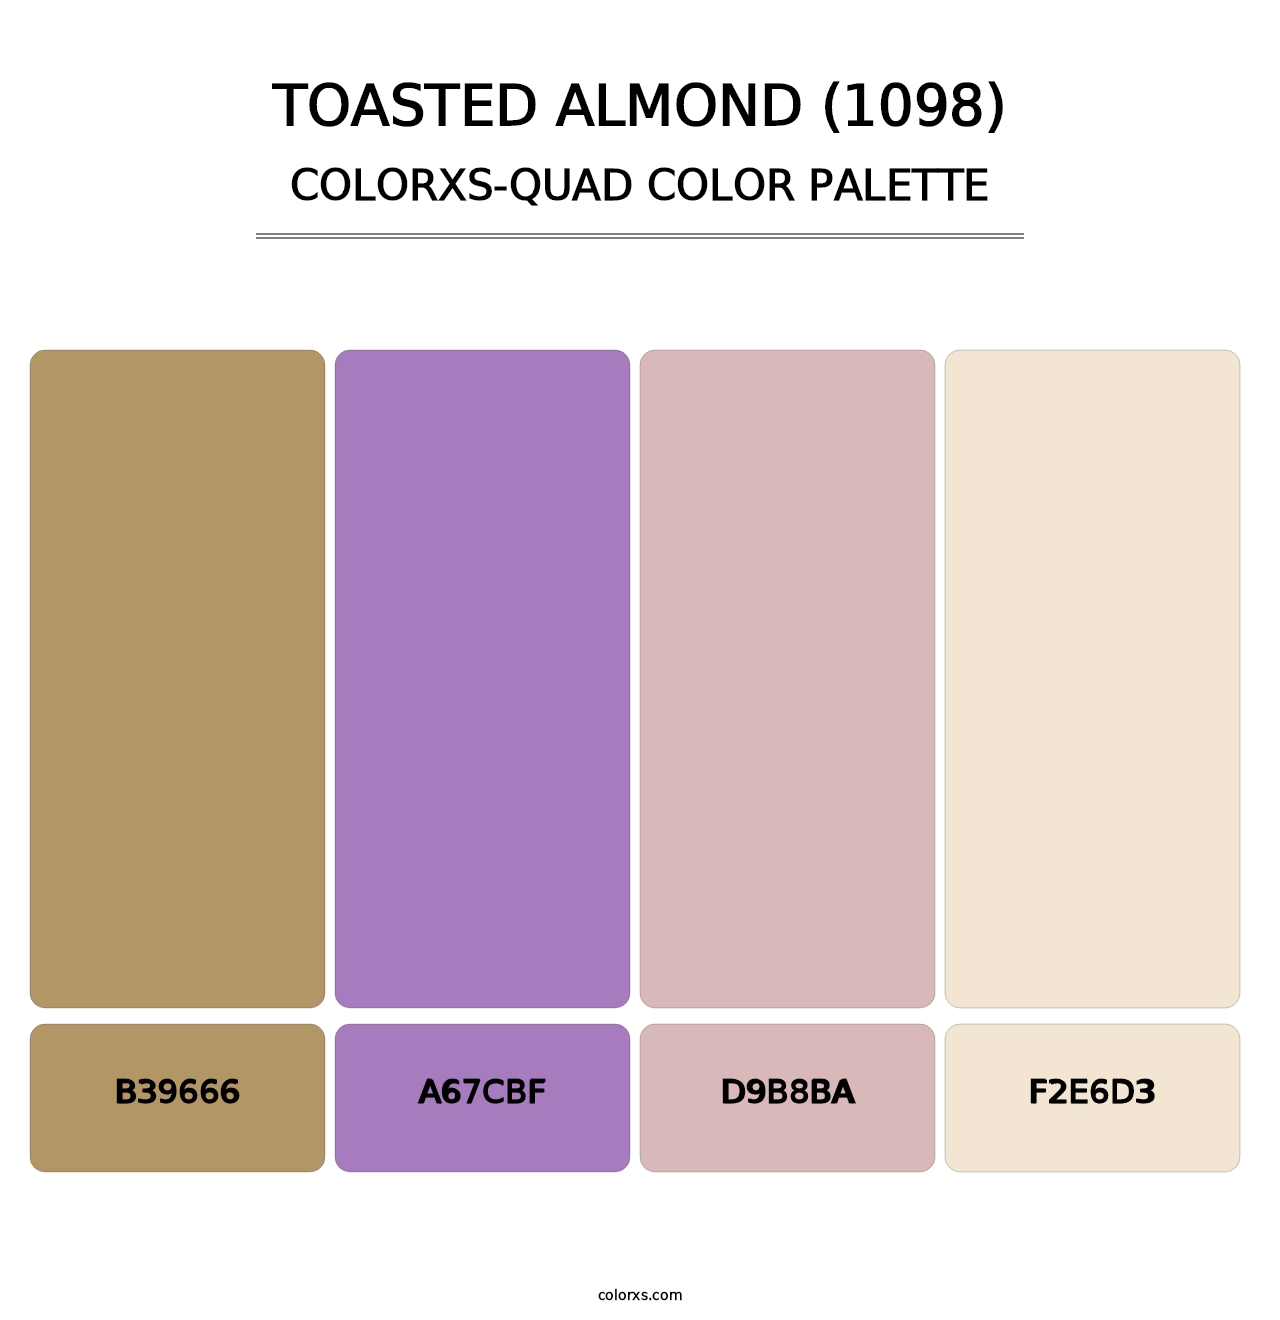 Toasted Almond (1098) - Colorxs Quad Palette